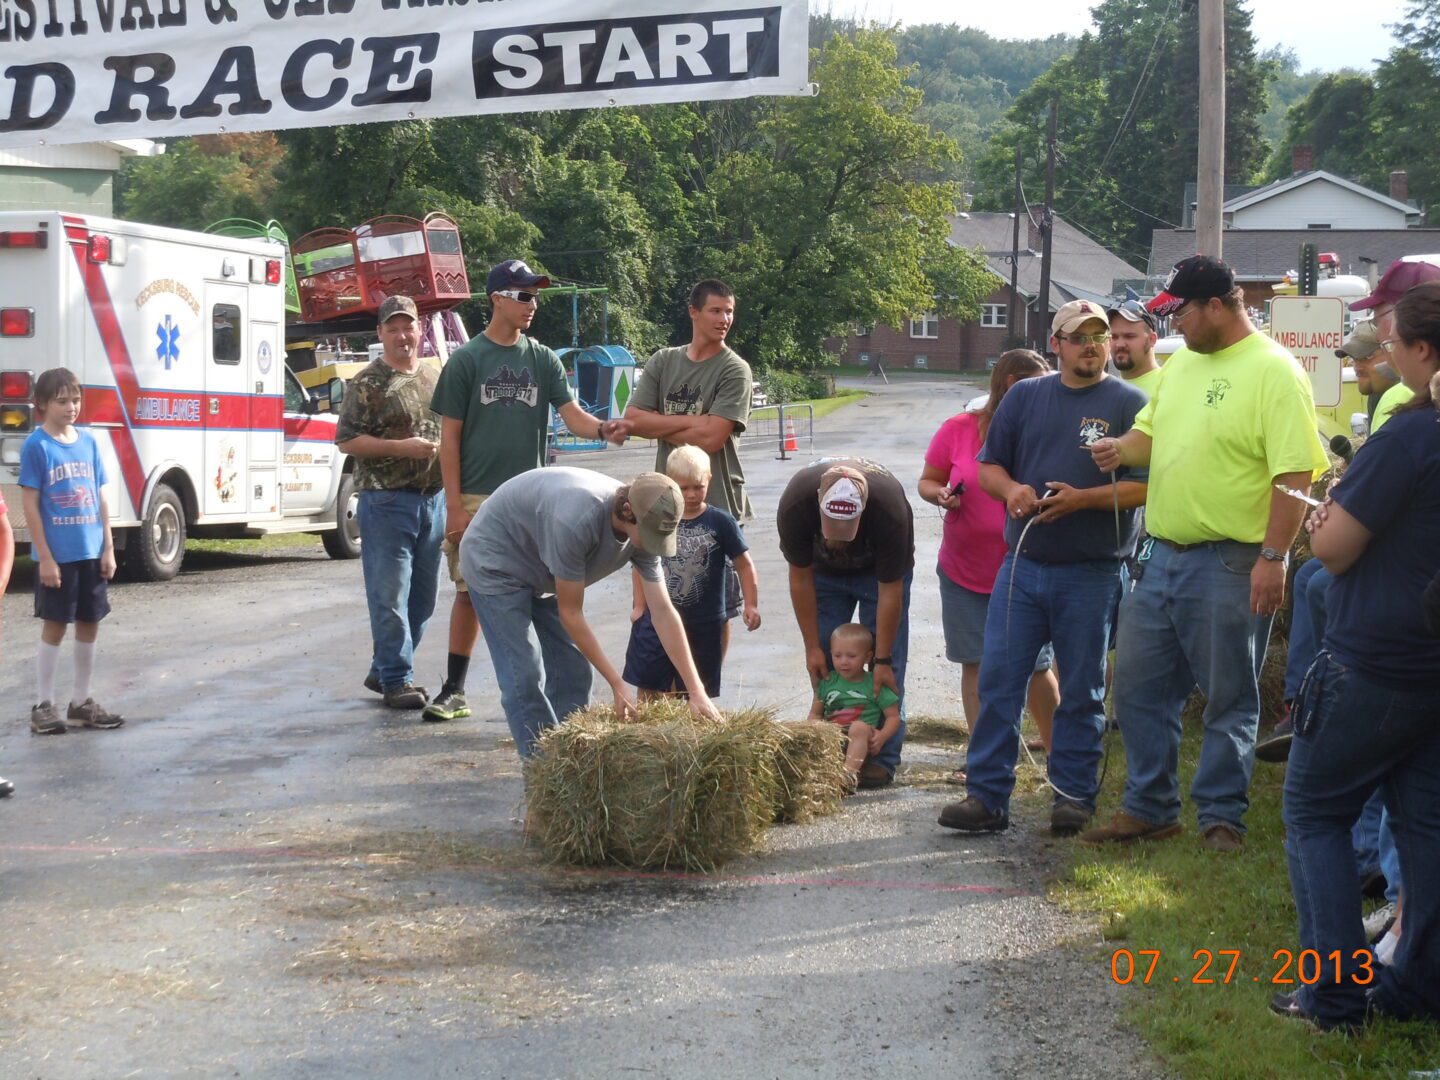 A group of people standing around hay bales.